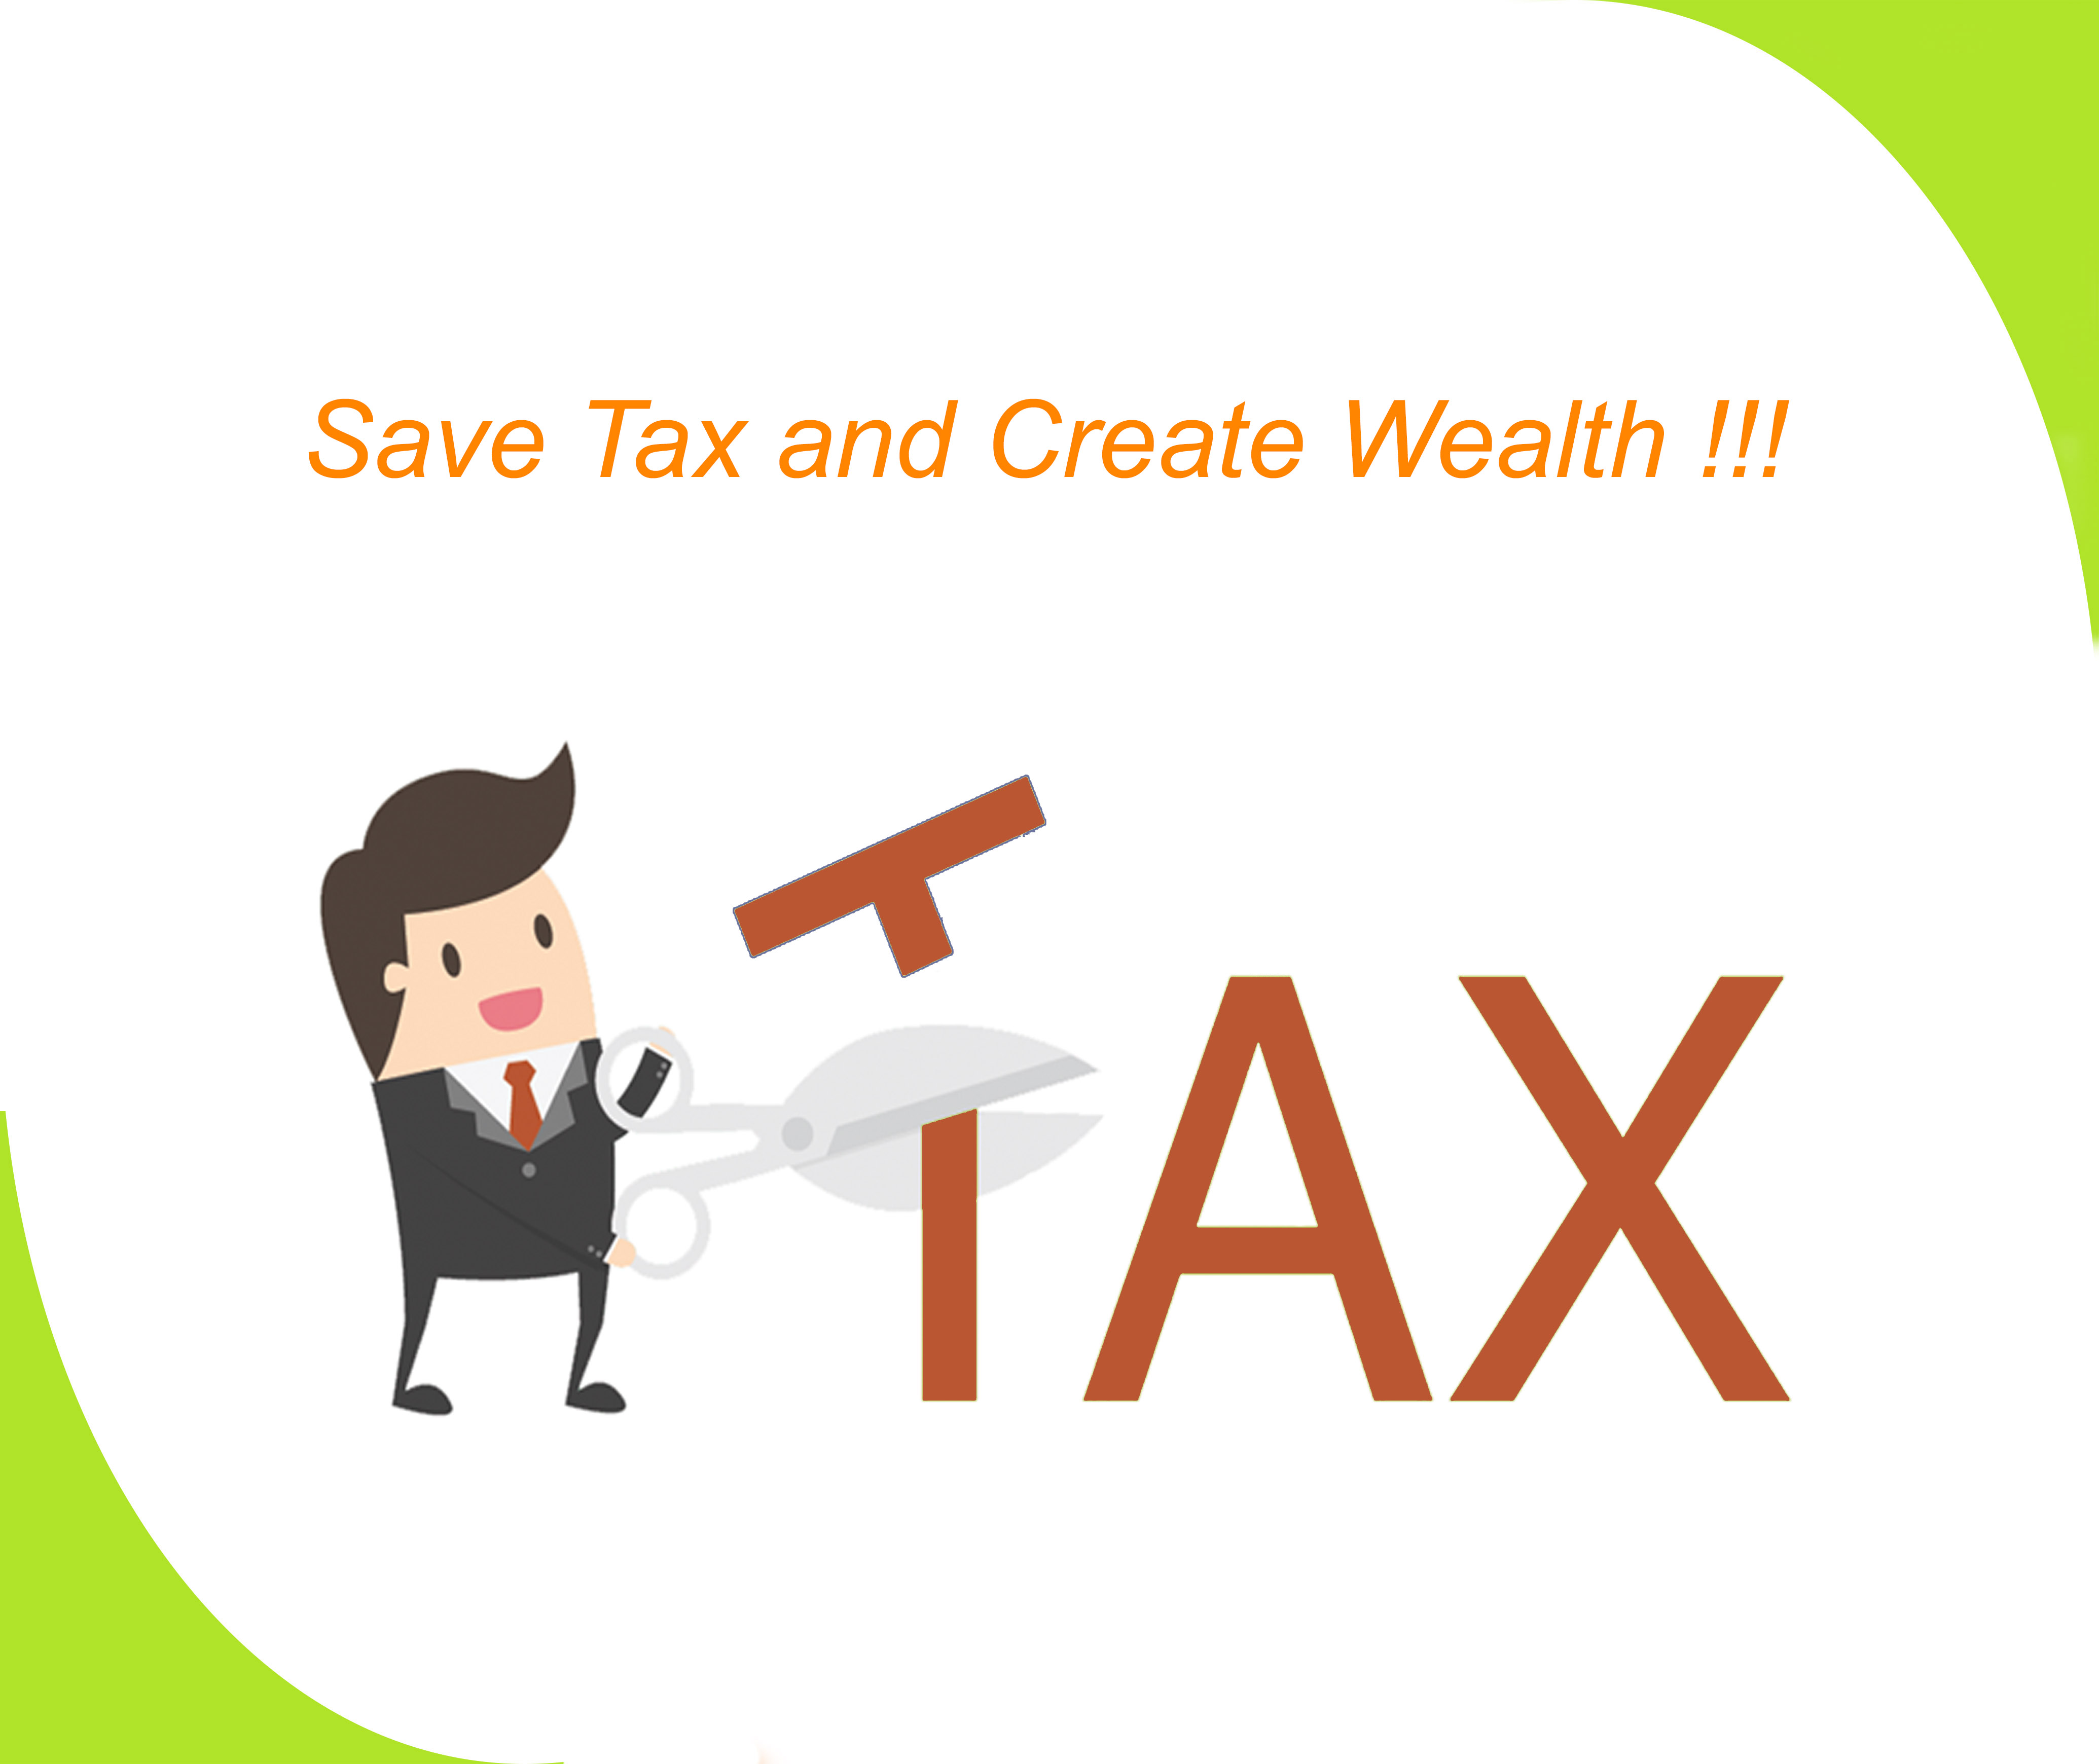 How to Save Tax